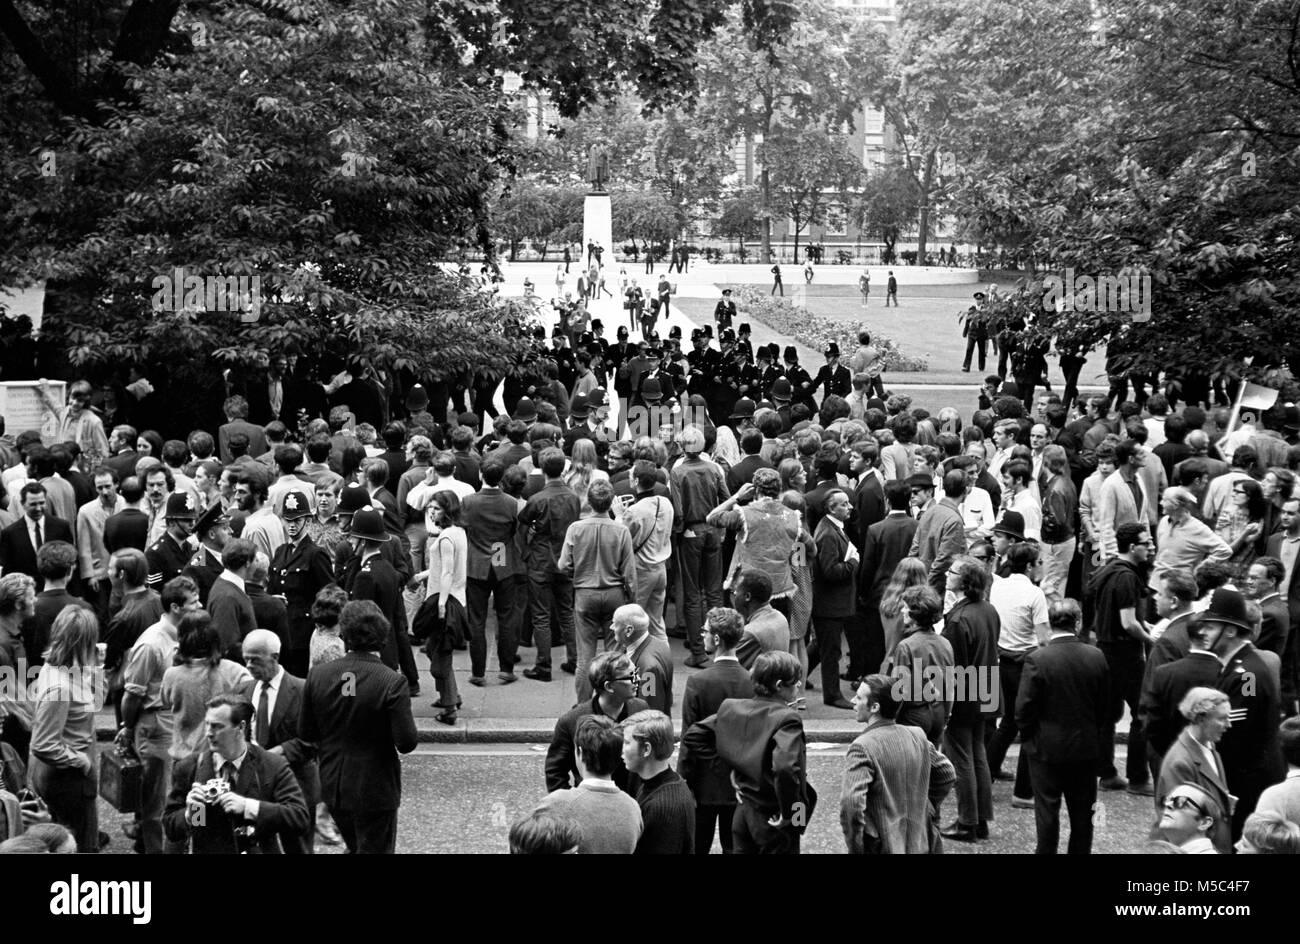 Student Protest 1960s Stock Photos & Student Protest 1960s Stock Images - Alamy1300 x 944